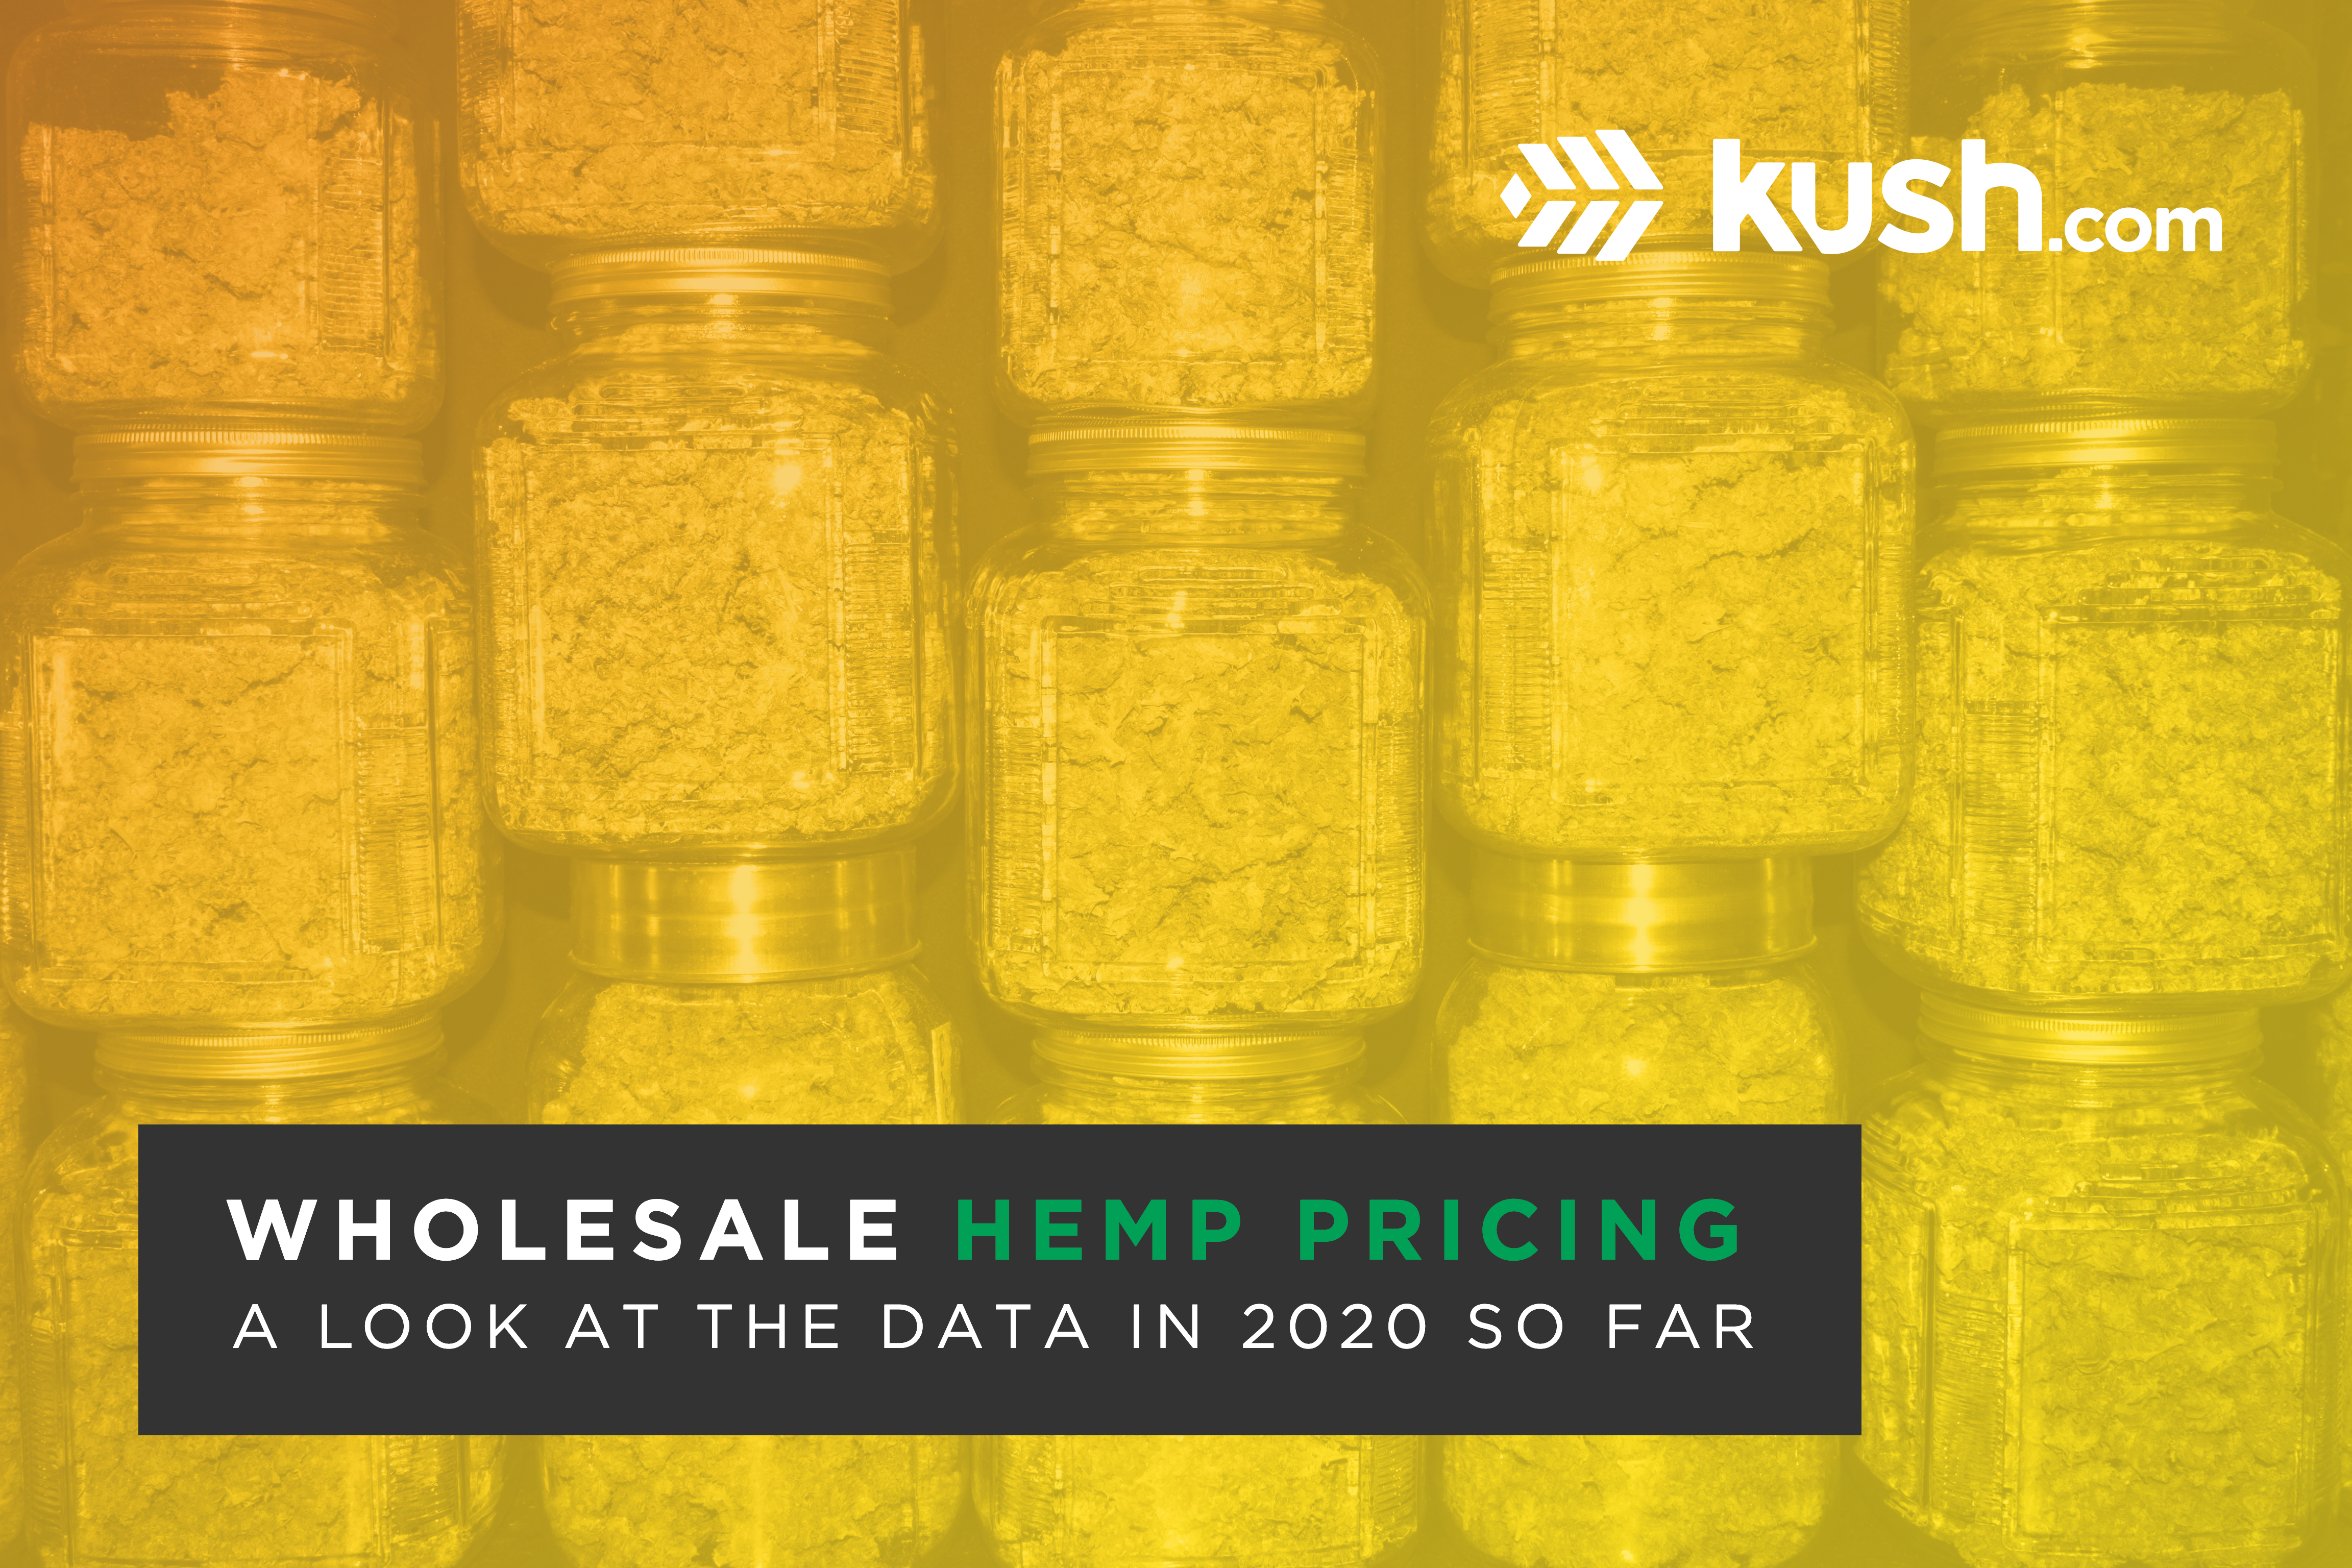 Wholesale Hemp Pricing 2020: A Breakdown of Products by Category